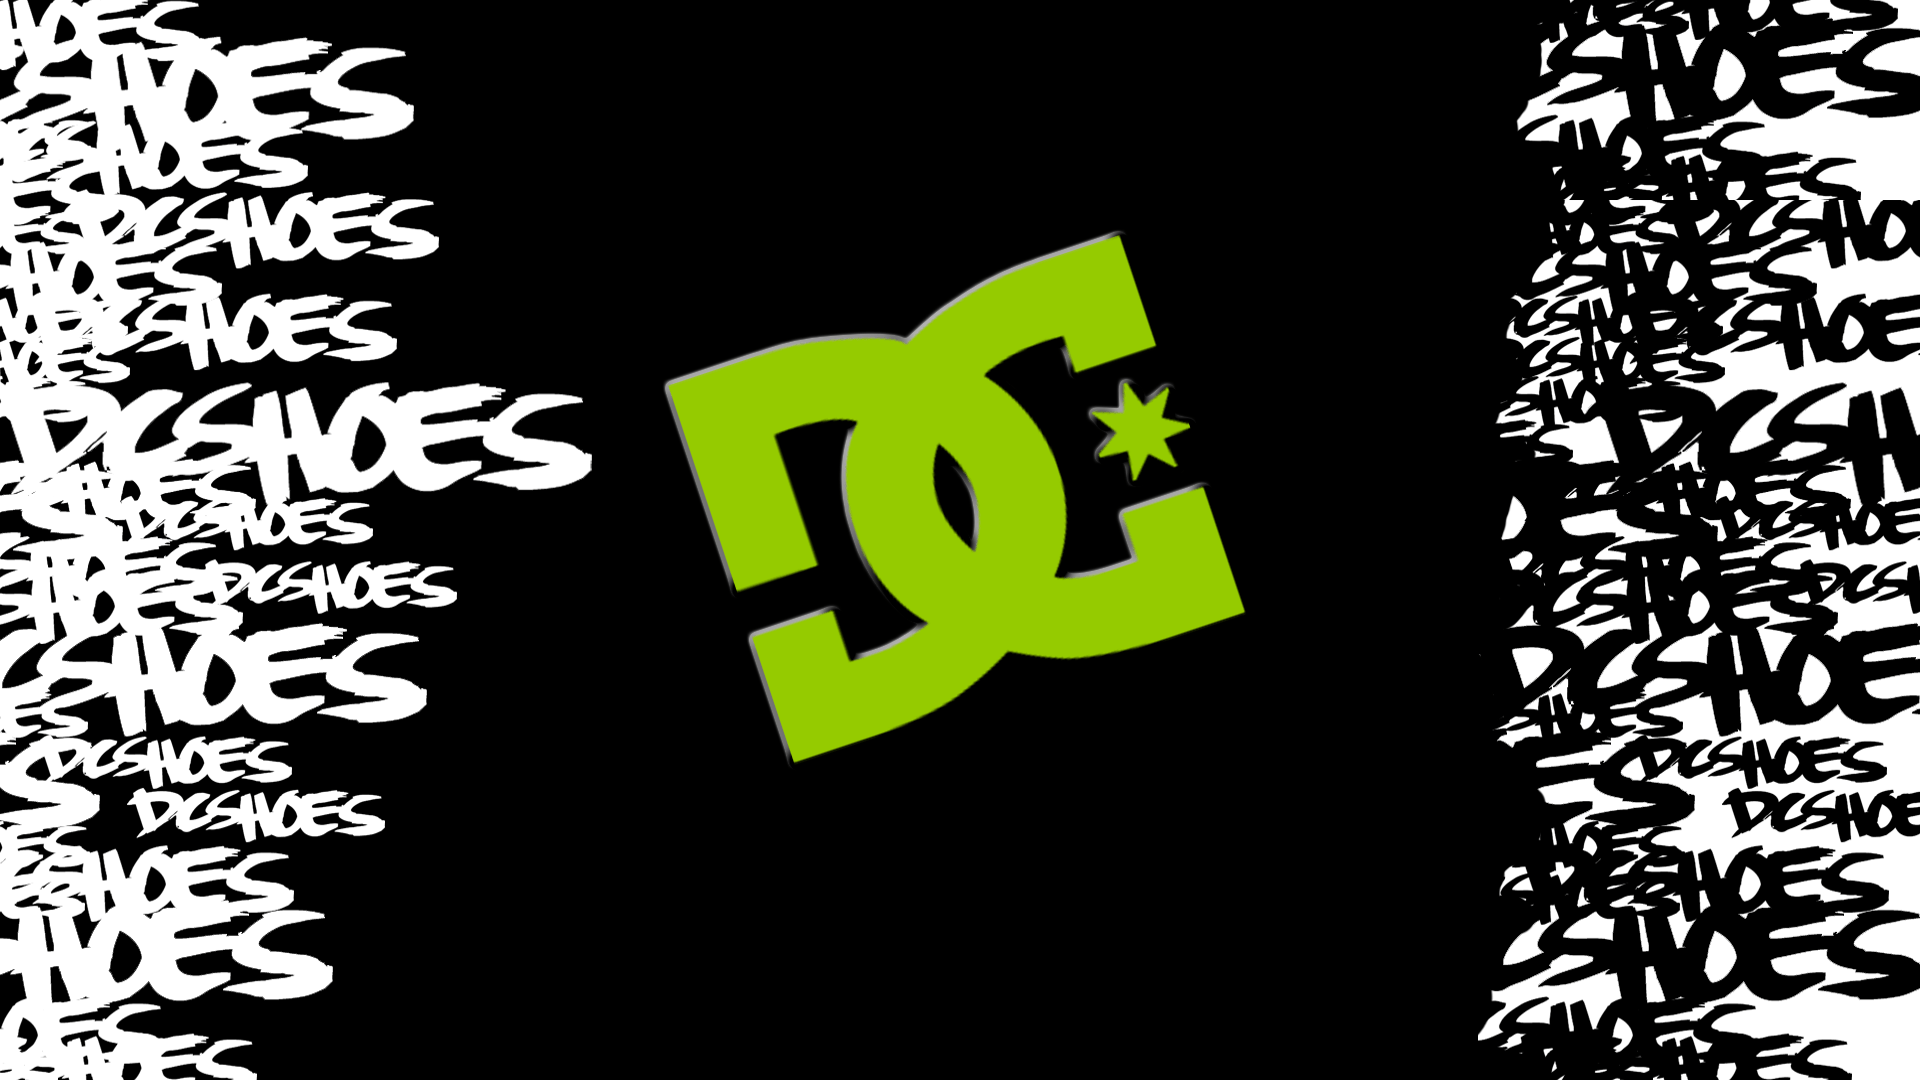 High Quality DC Logo Wallpaper. Full HD Picture